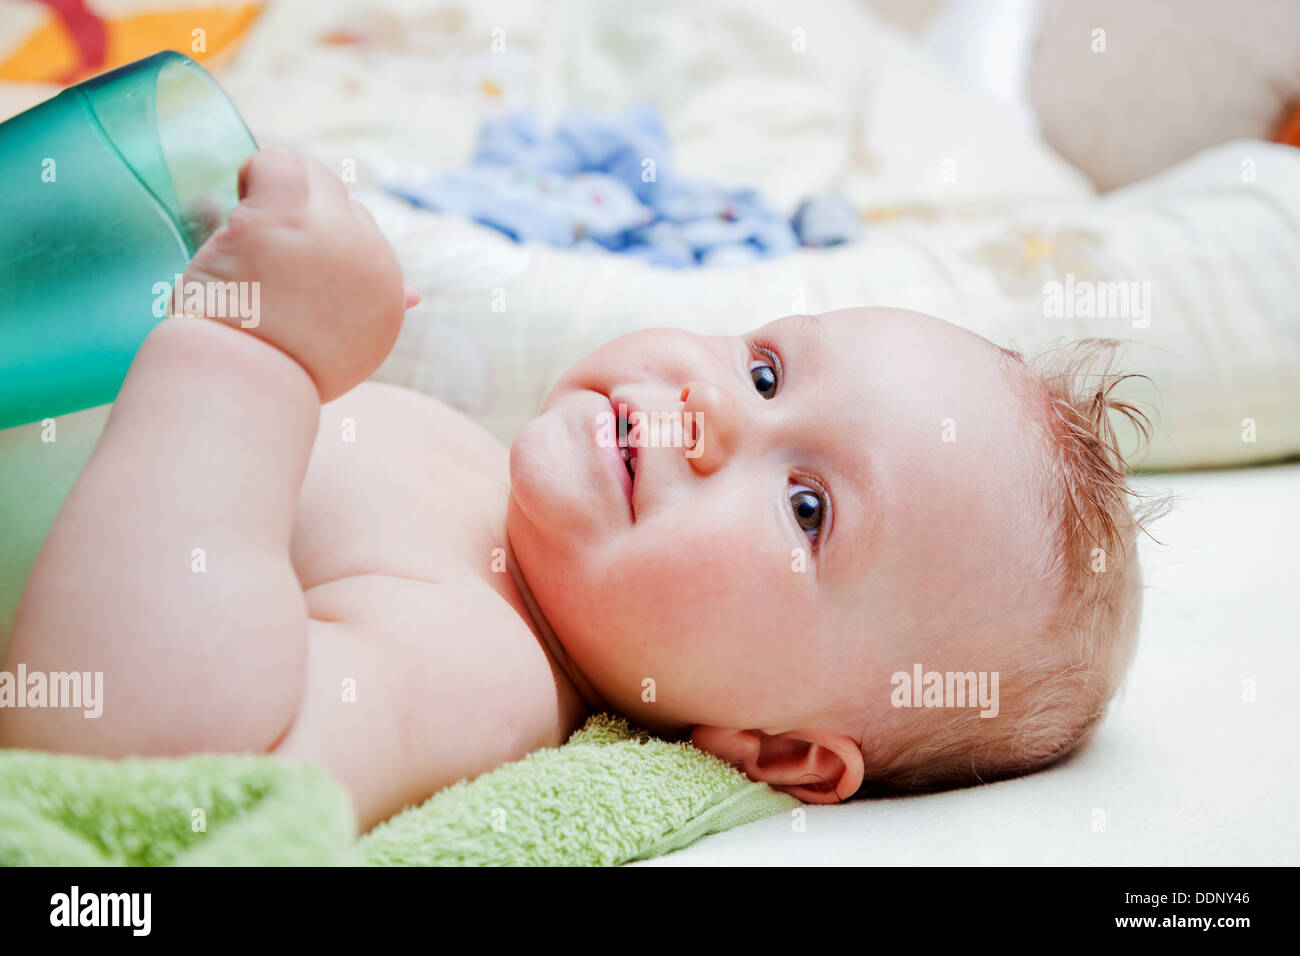 A baby lying on his back Stock Photo